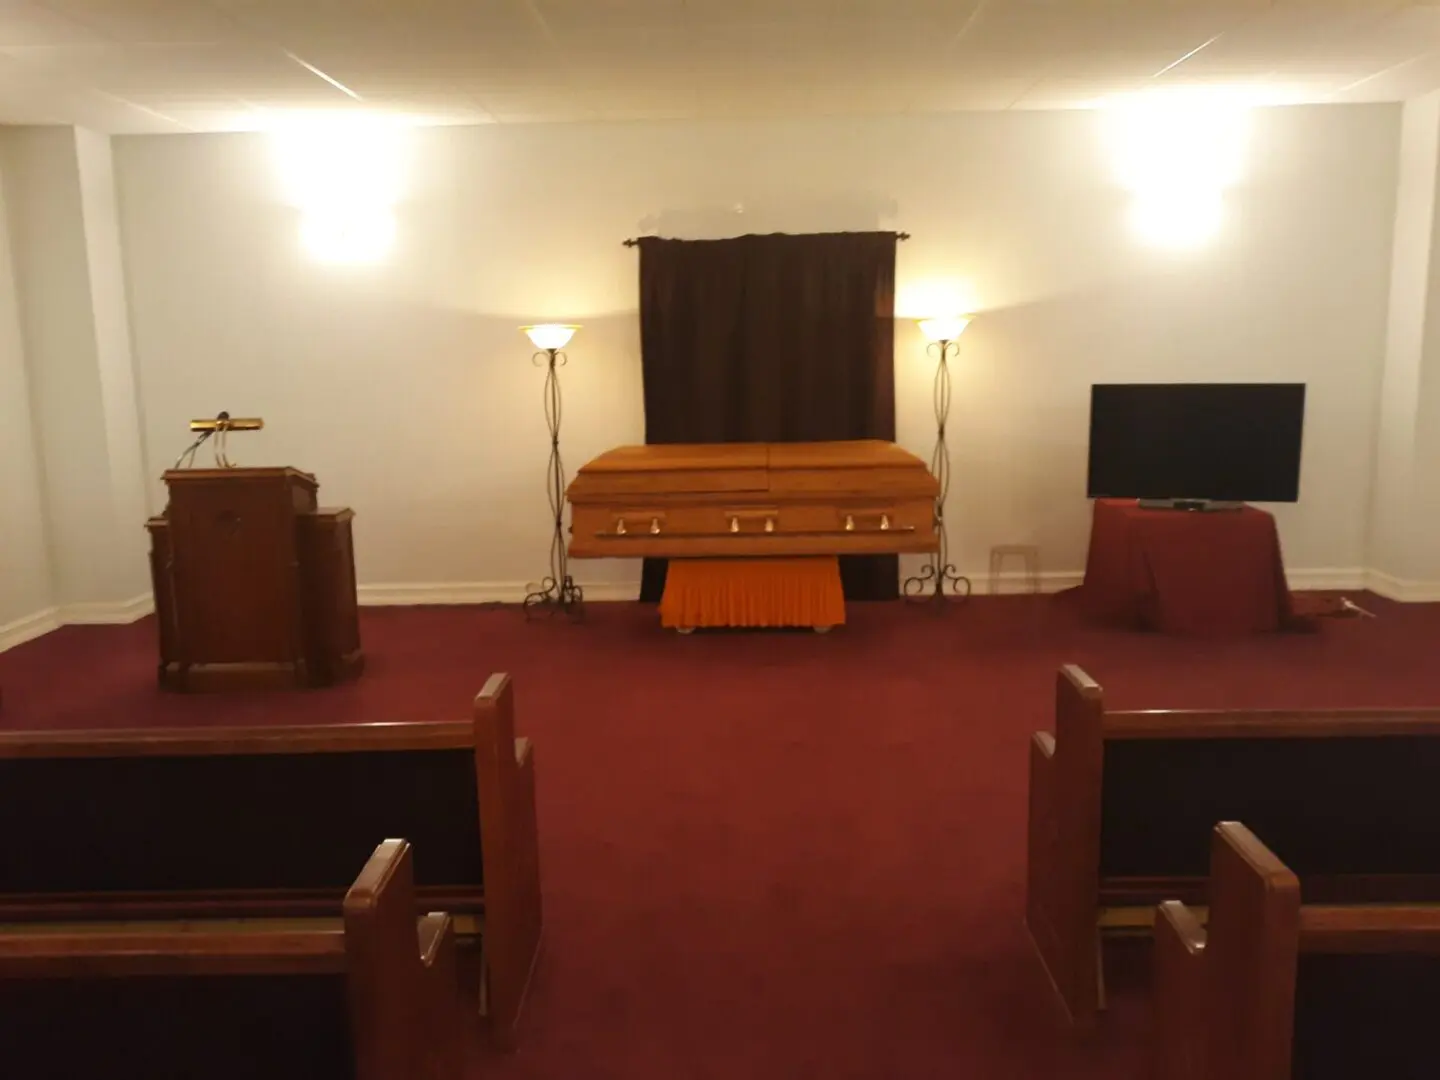 A Funeral Chapel Place With Red Color Carpet